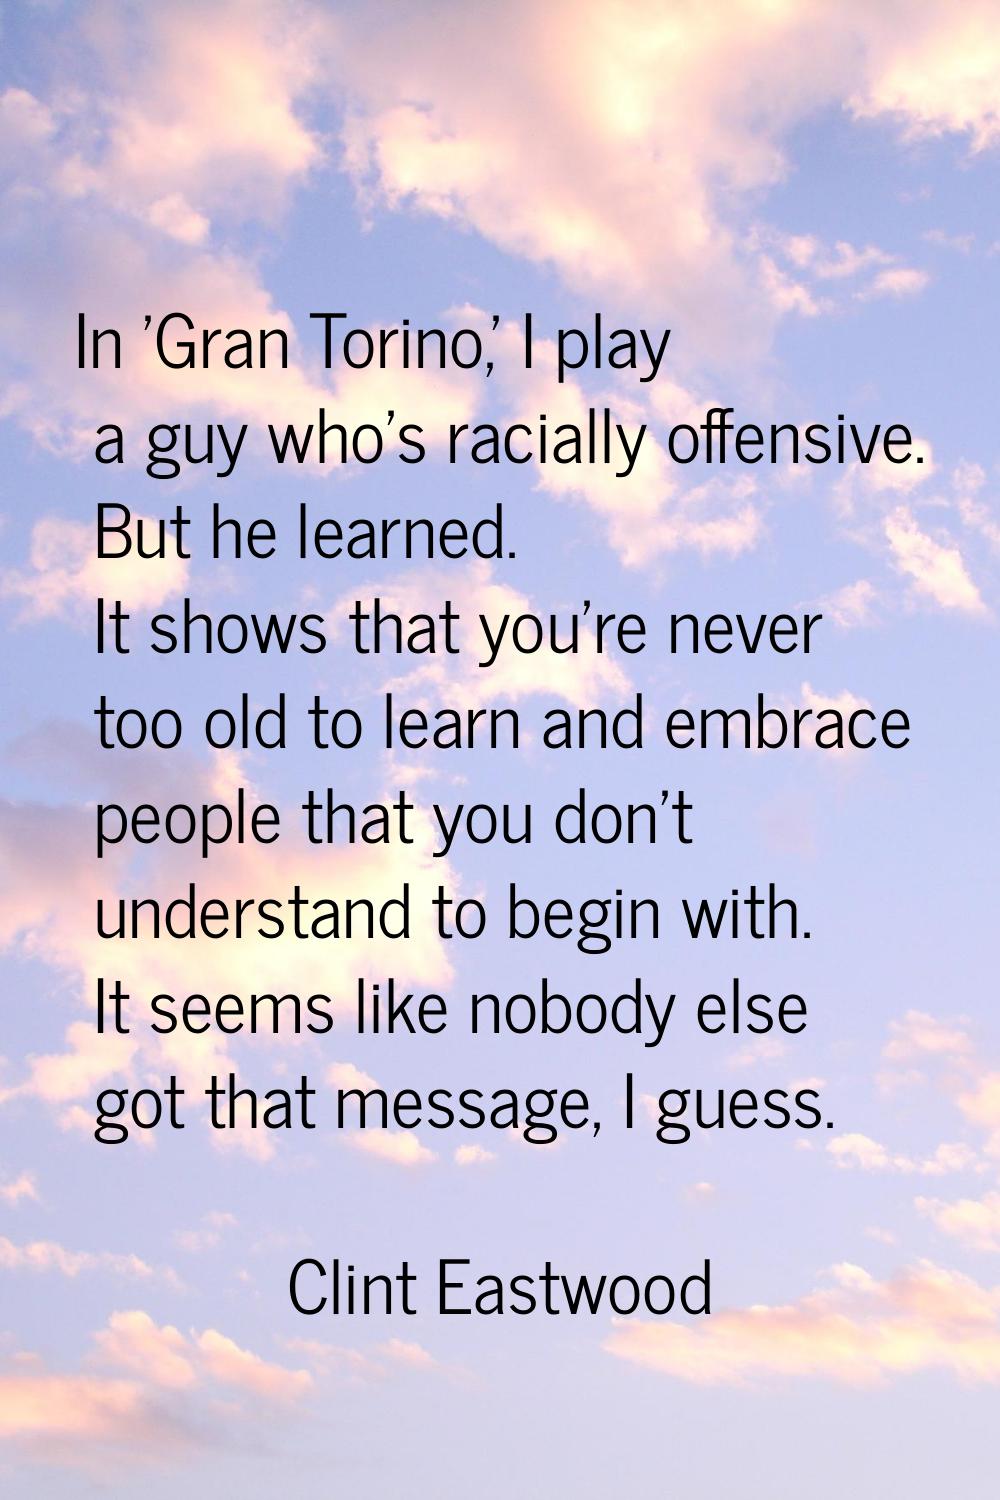 In 'Gran Torino,' I play a guy who's racially offensive. But he learned. It shows that you're never